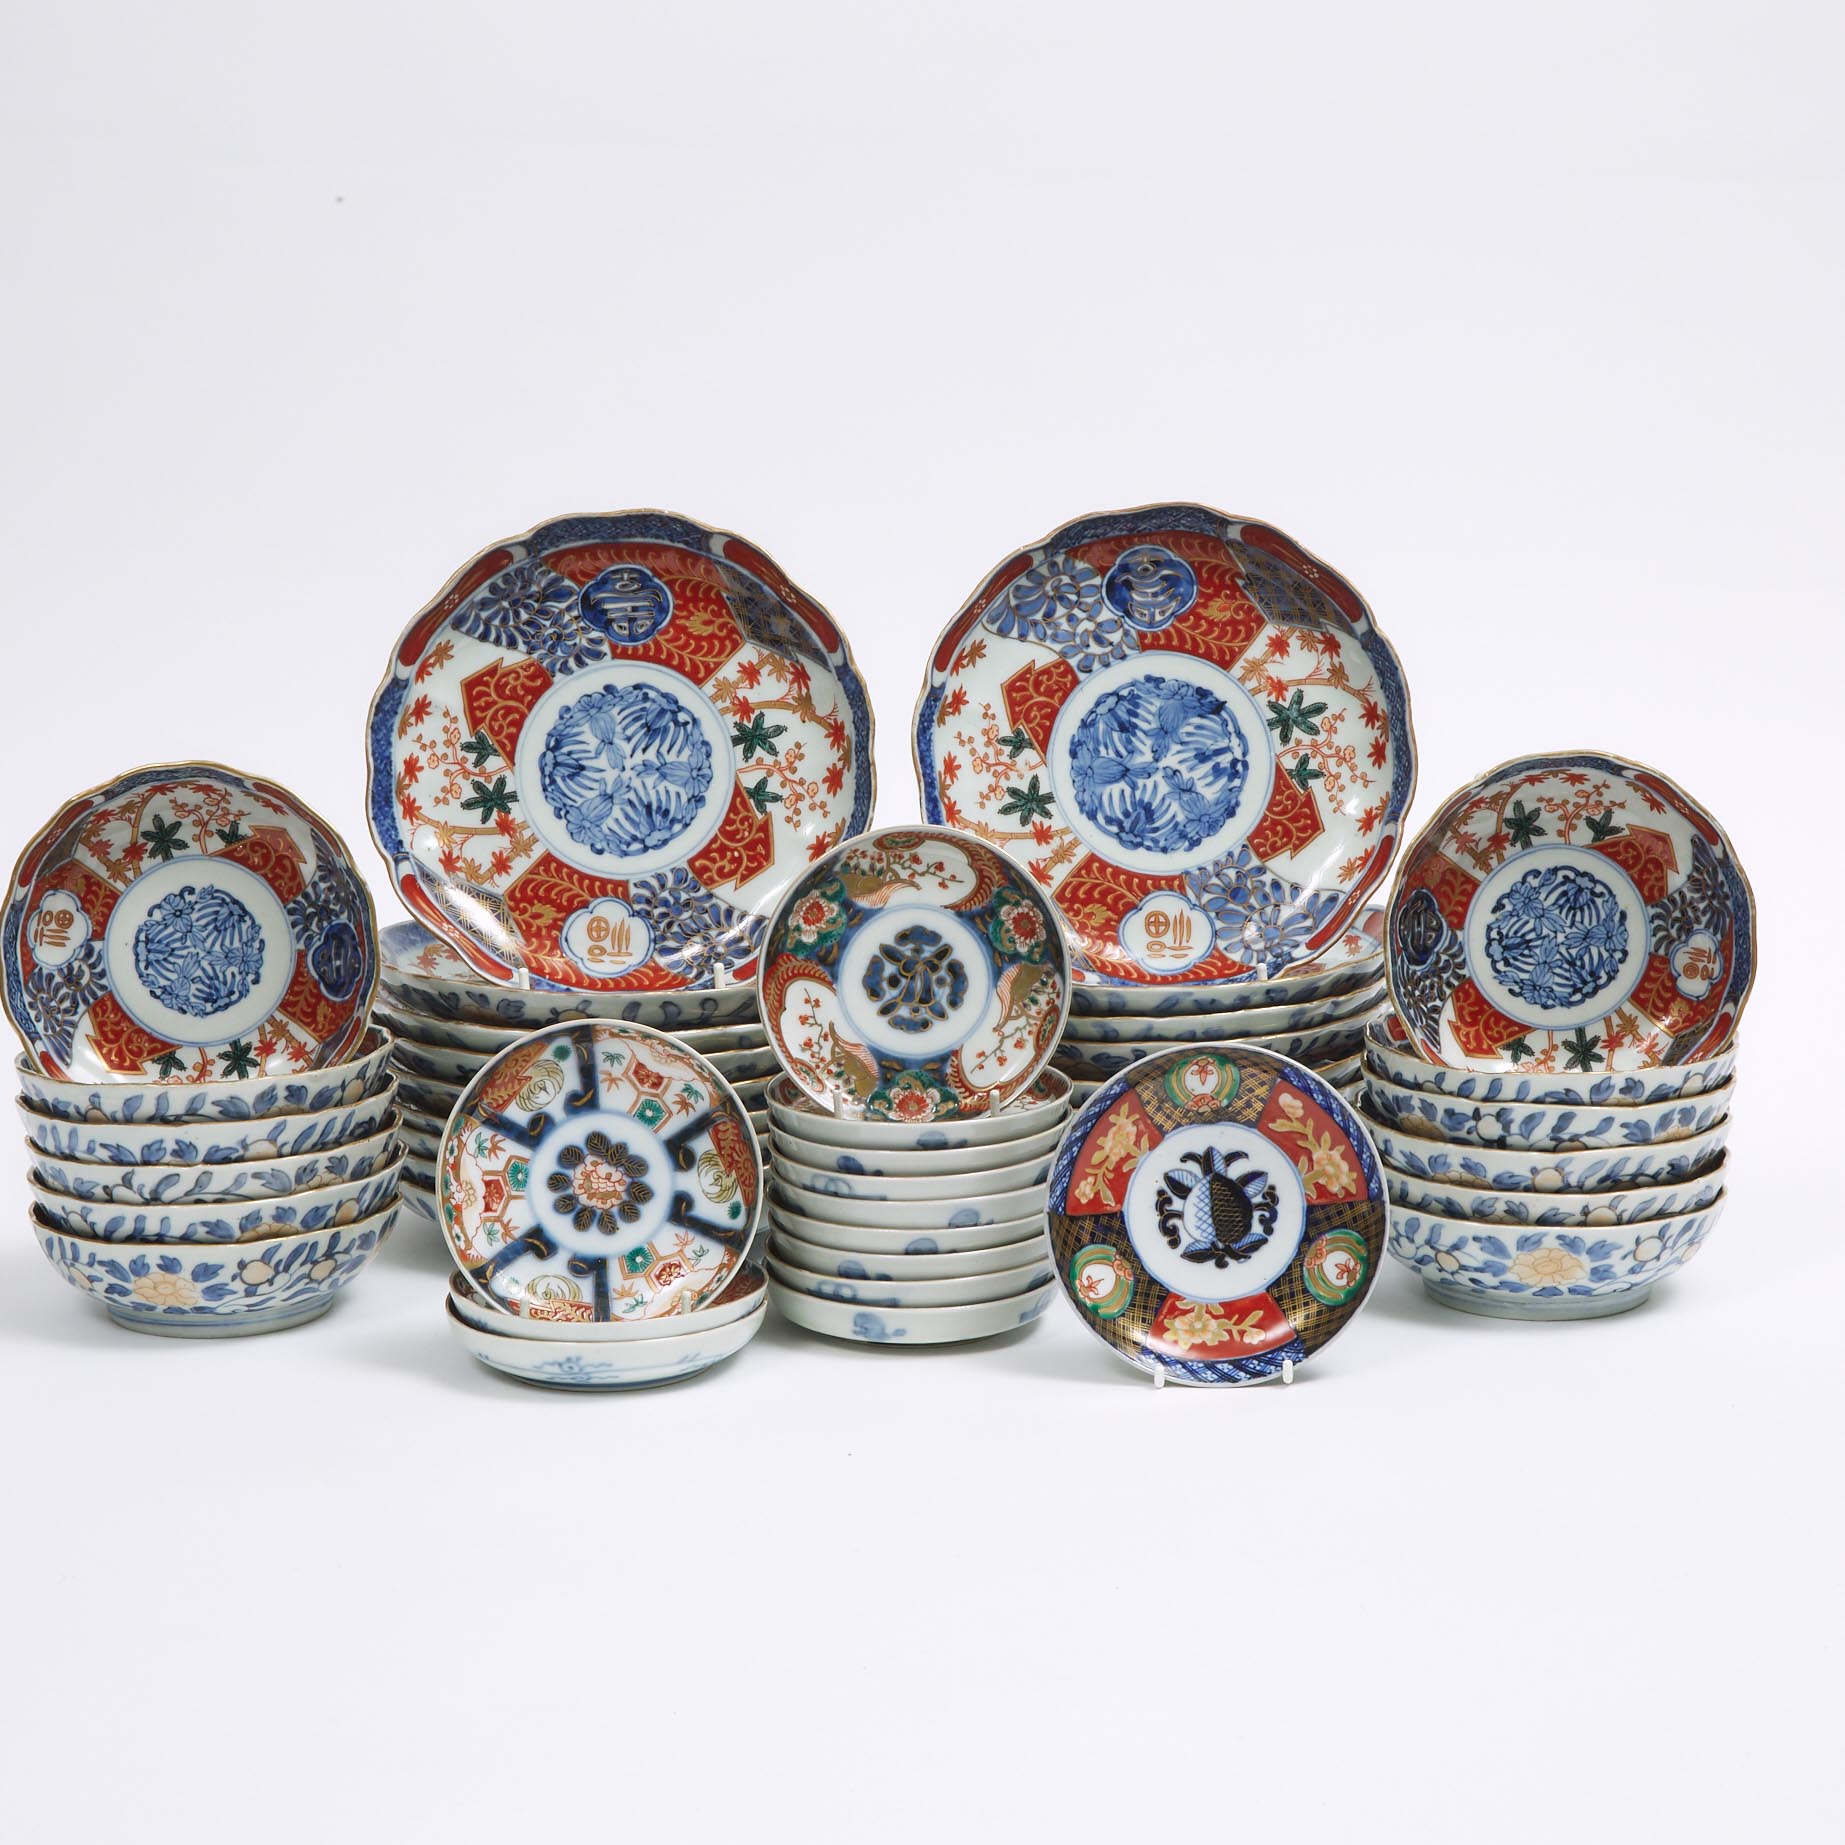 A Group of Forty-Three Imari Dishes, Meiji Period